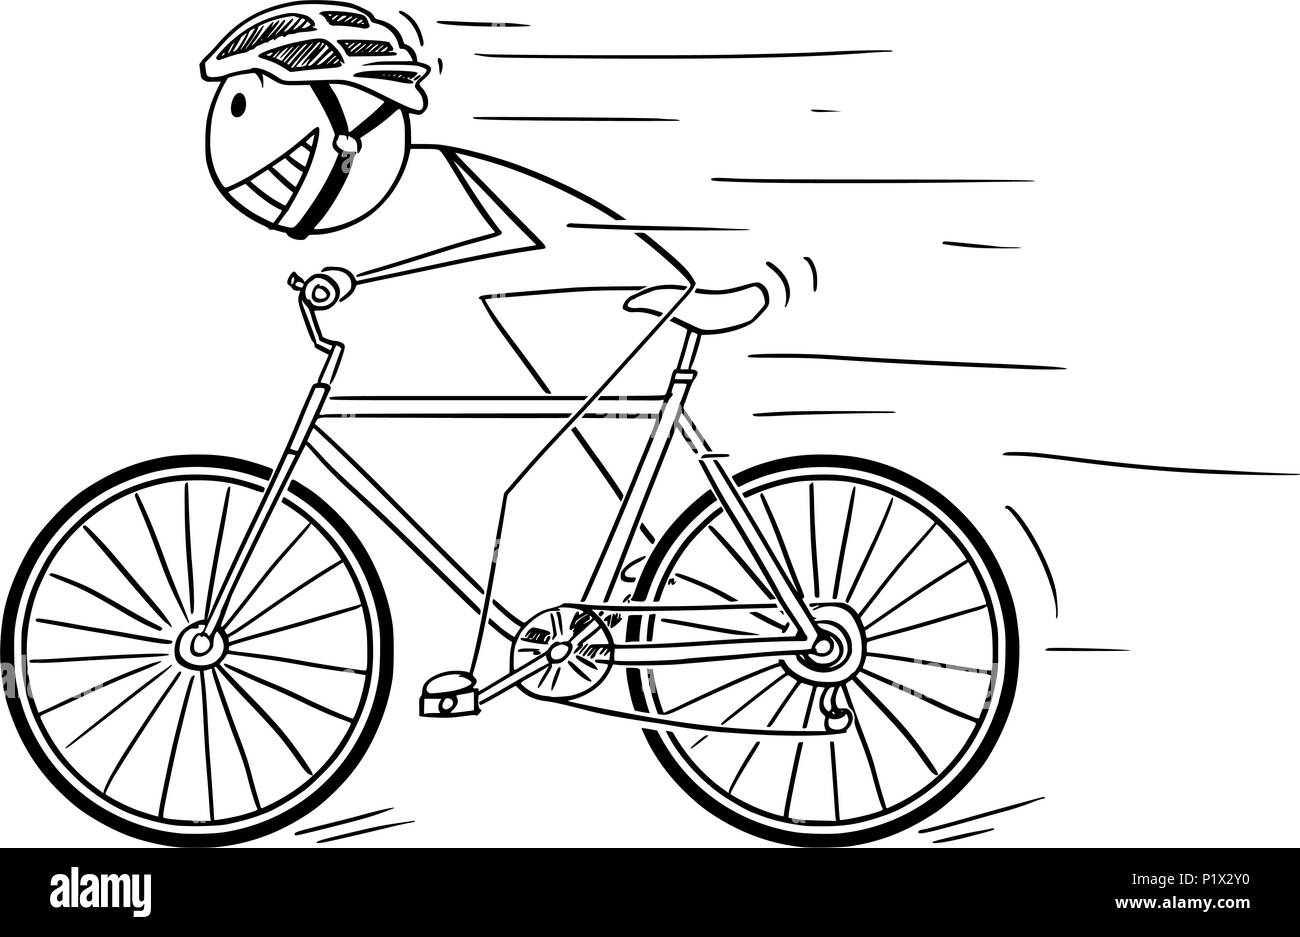 Cartoon of Man With Helmet Riding Fast on Bicycle Stock Vector